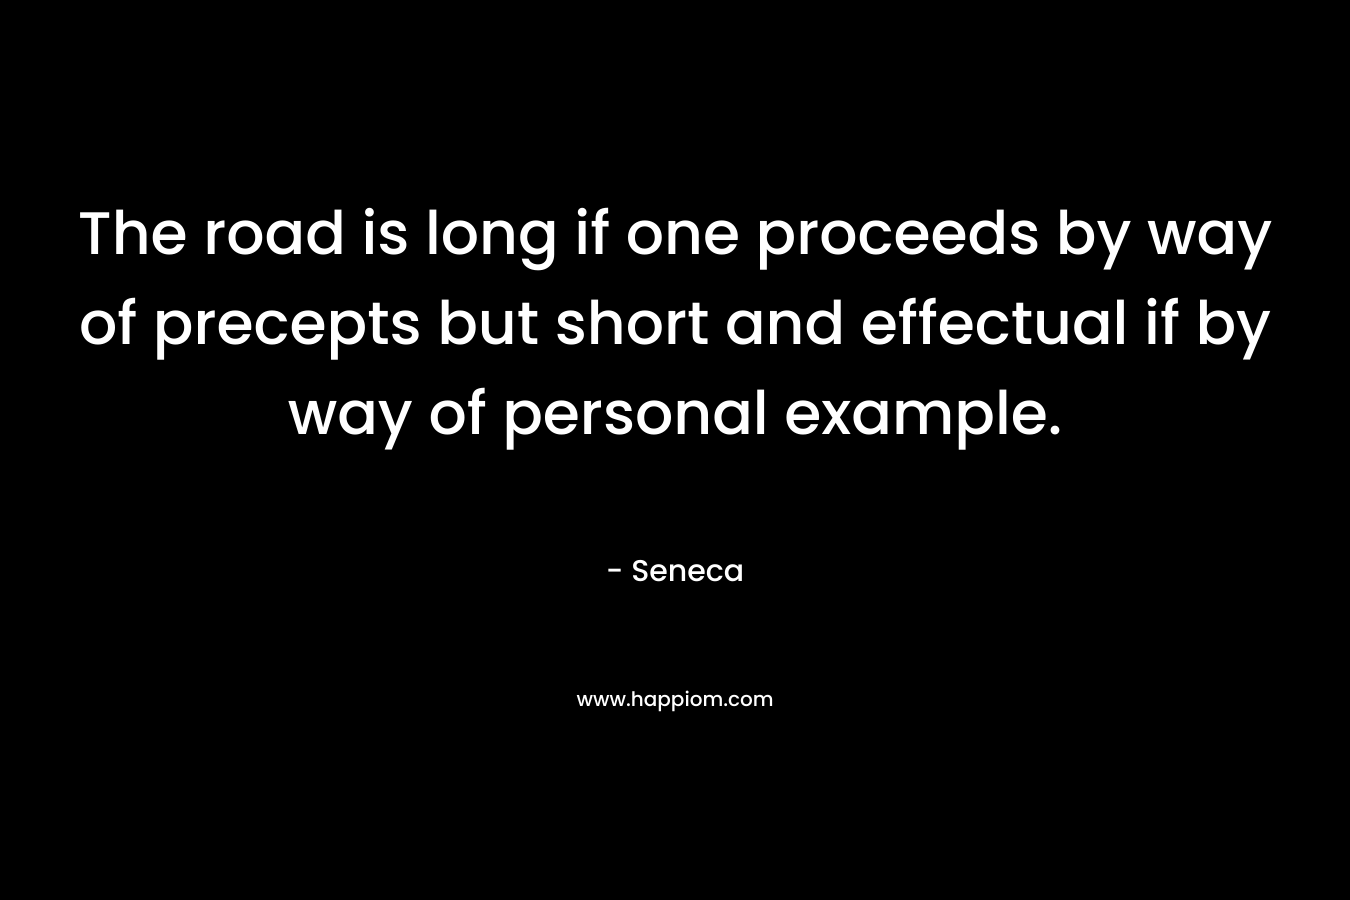 The road is long if one proceeds by way of precepts but short and effectual if by way of personal example. – Seneca